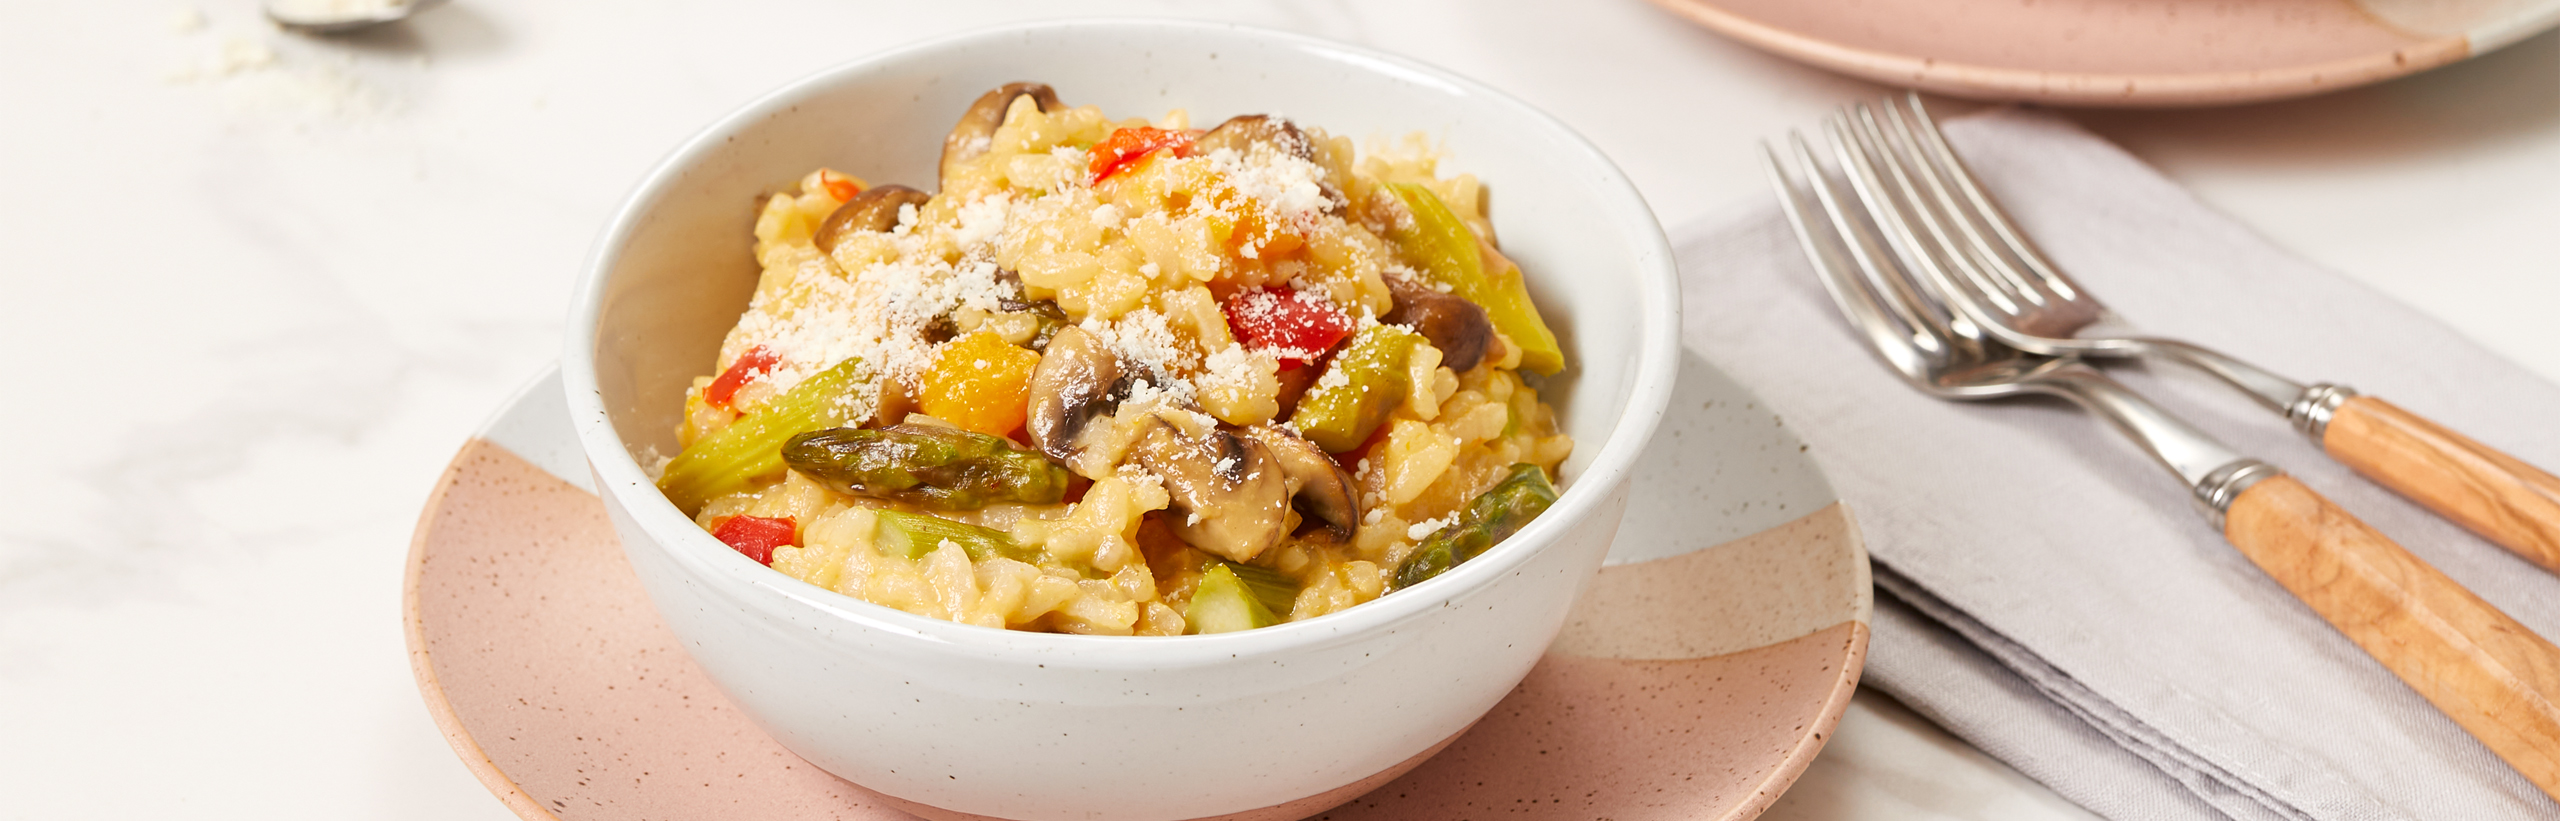 Minced Chicken and Vegetable Risotto Recipe 